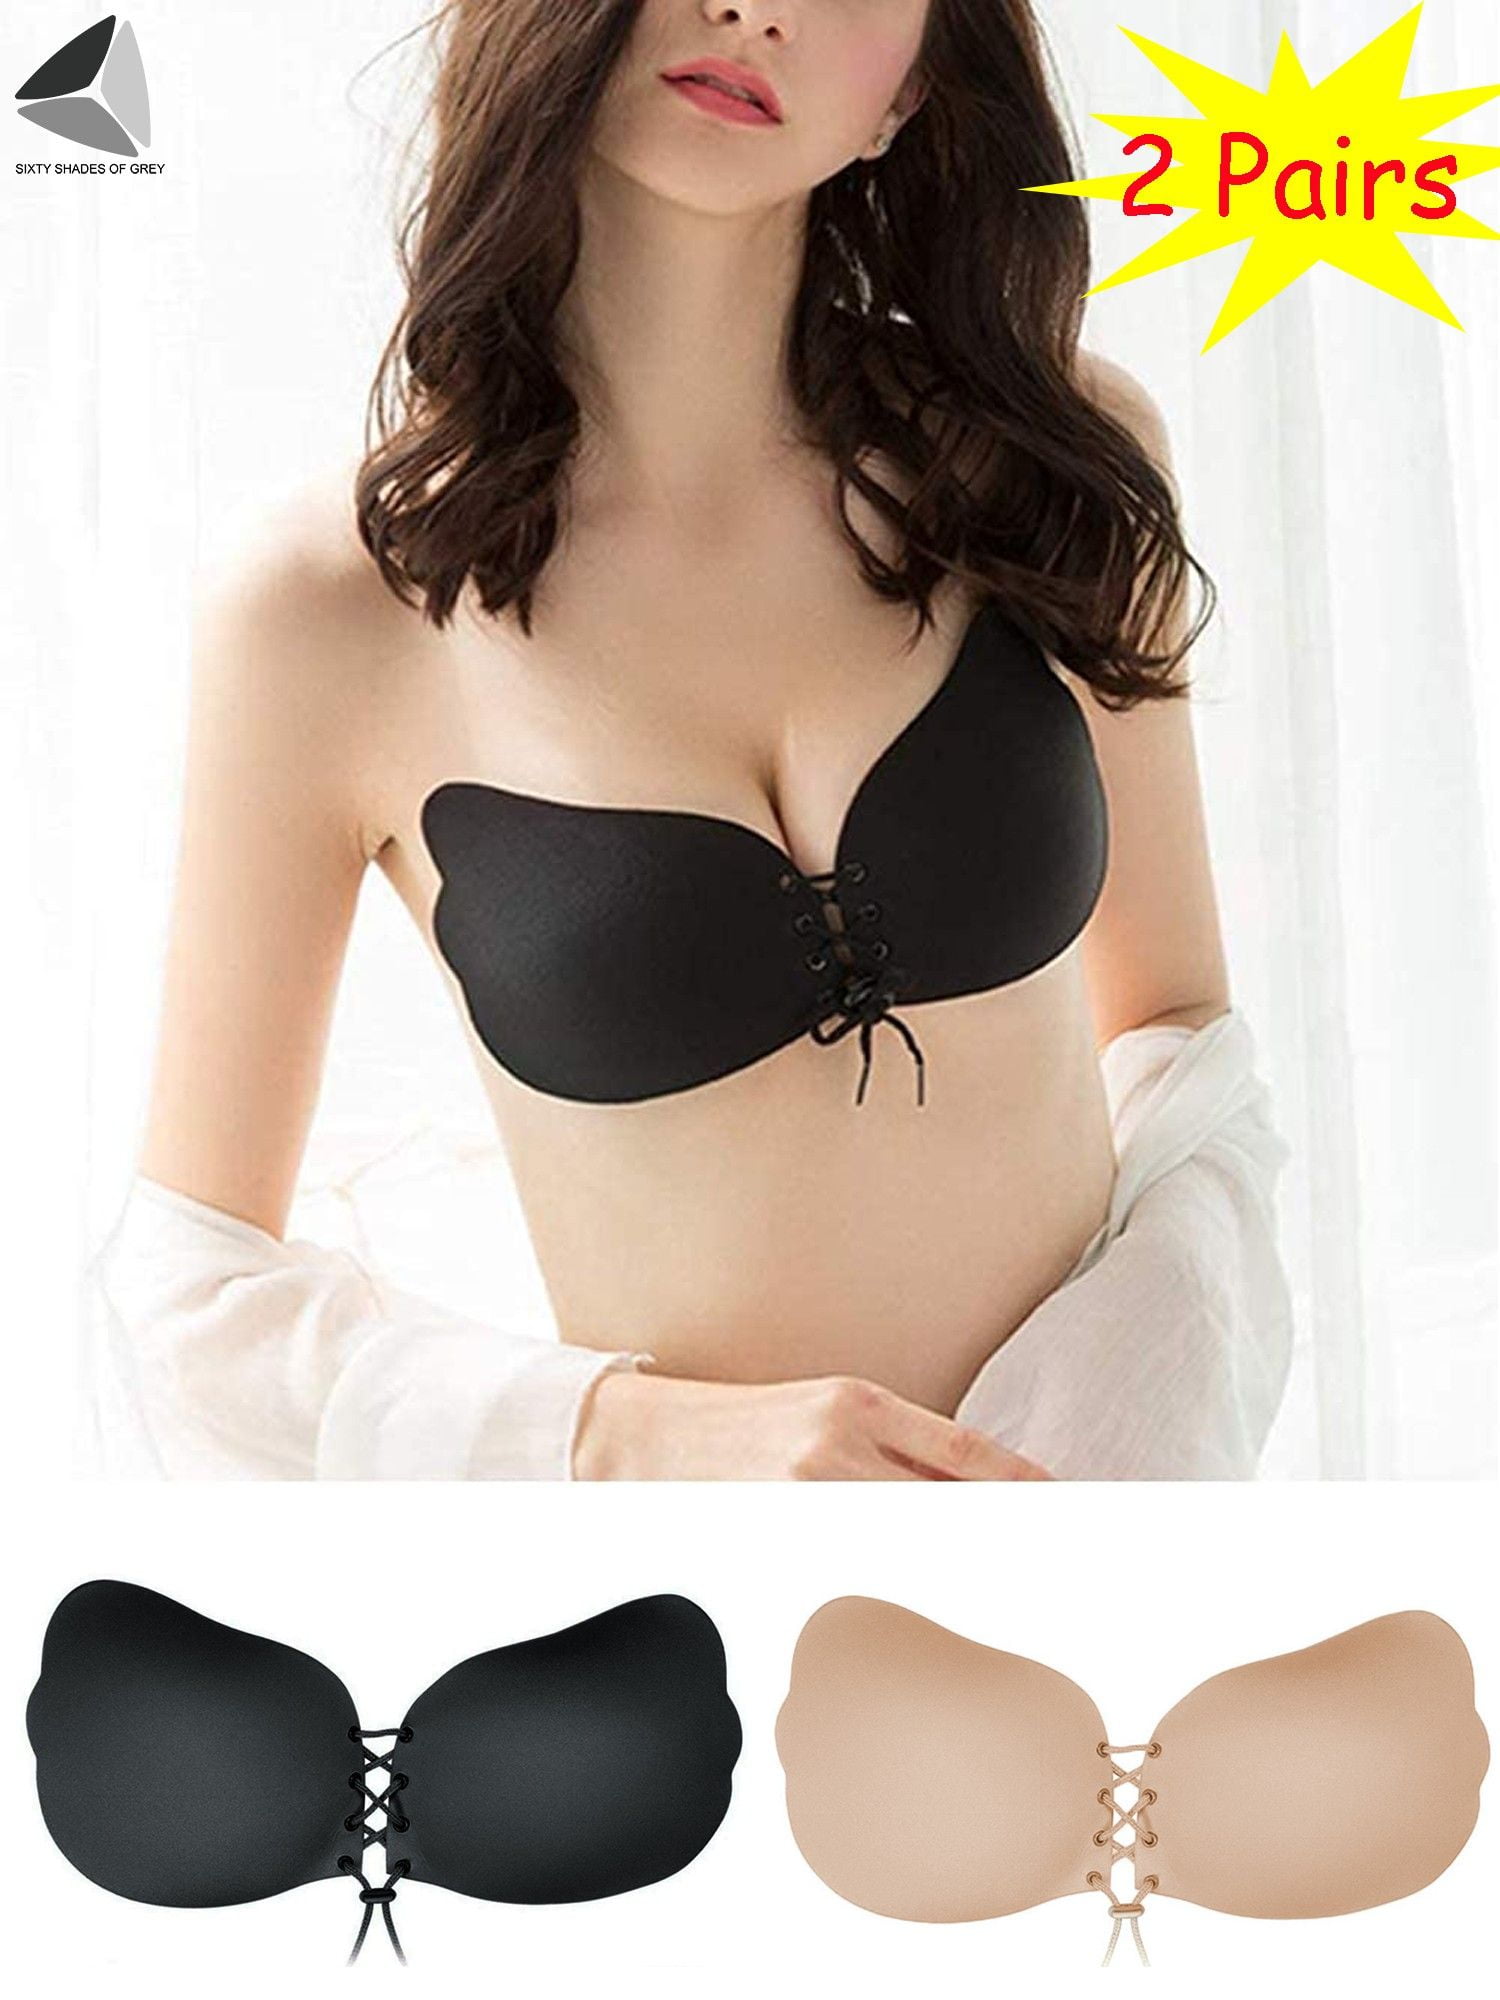 PULLIMORE 2 Pairs Women Adhesive Invisible Strapless Bra Reusable Push-up  Silicone Sticky Bra (Cup A, Black + Skin) 